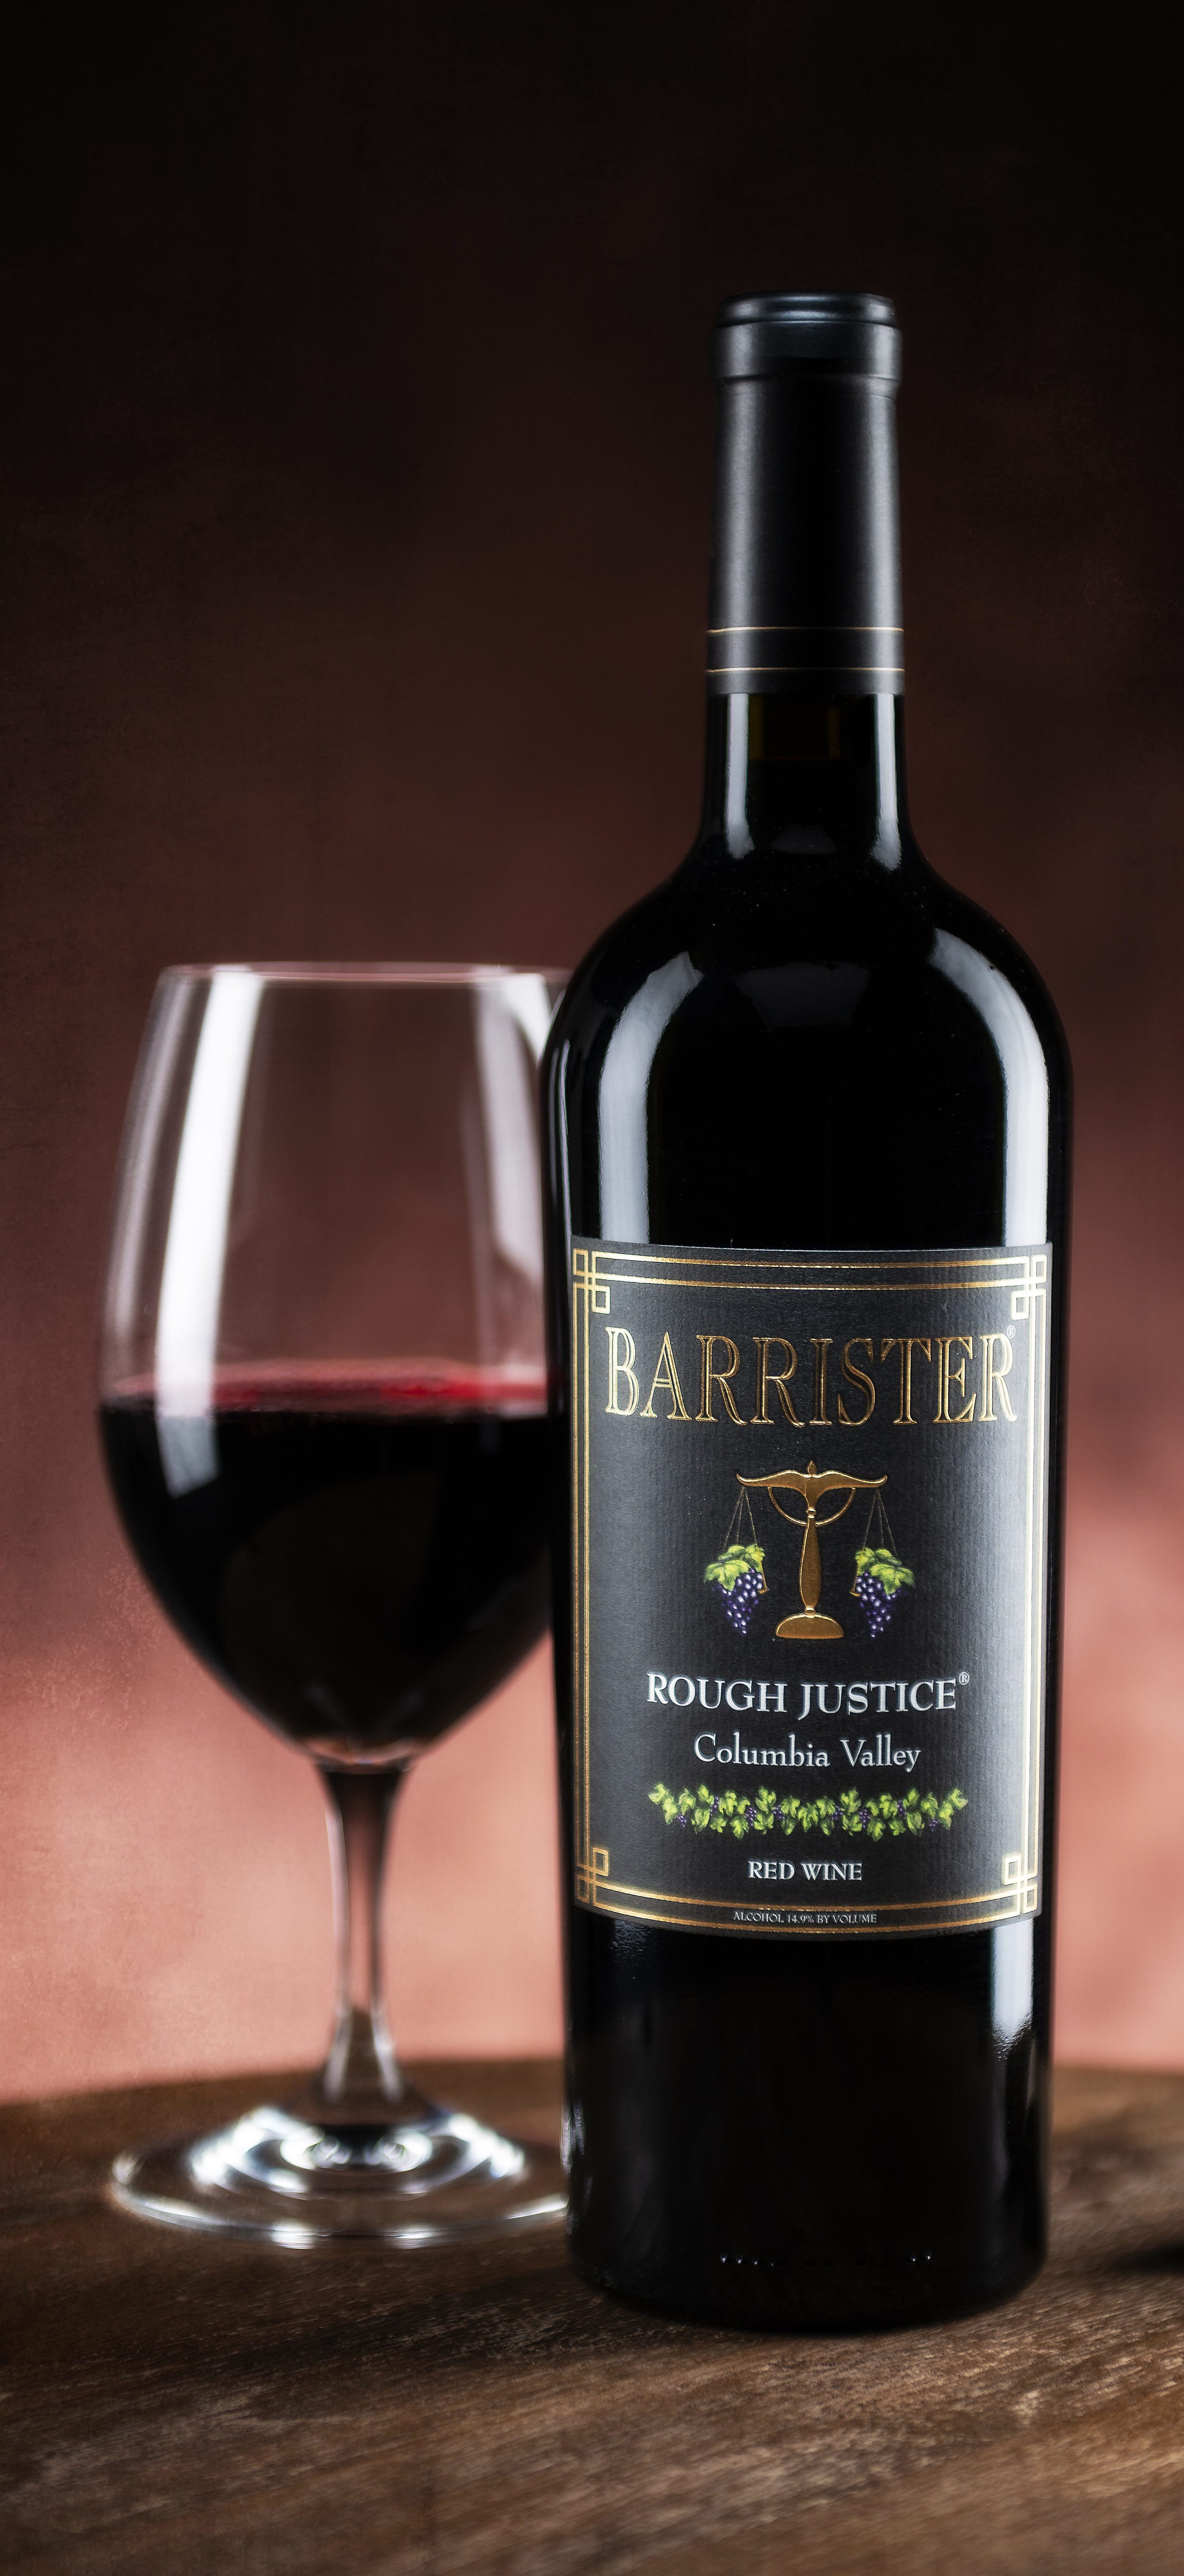 Barrister Winery